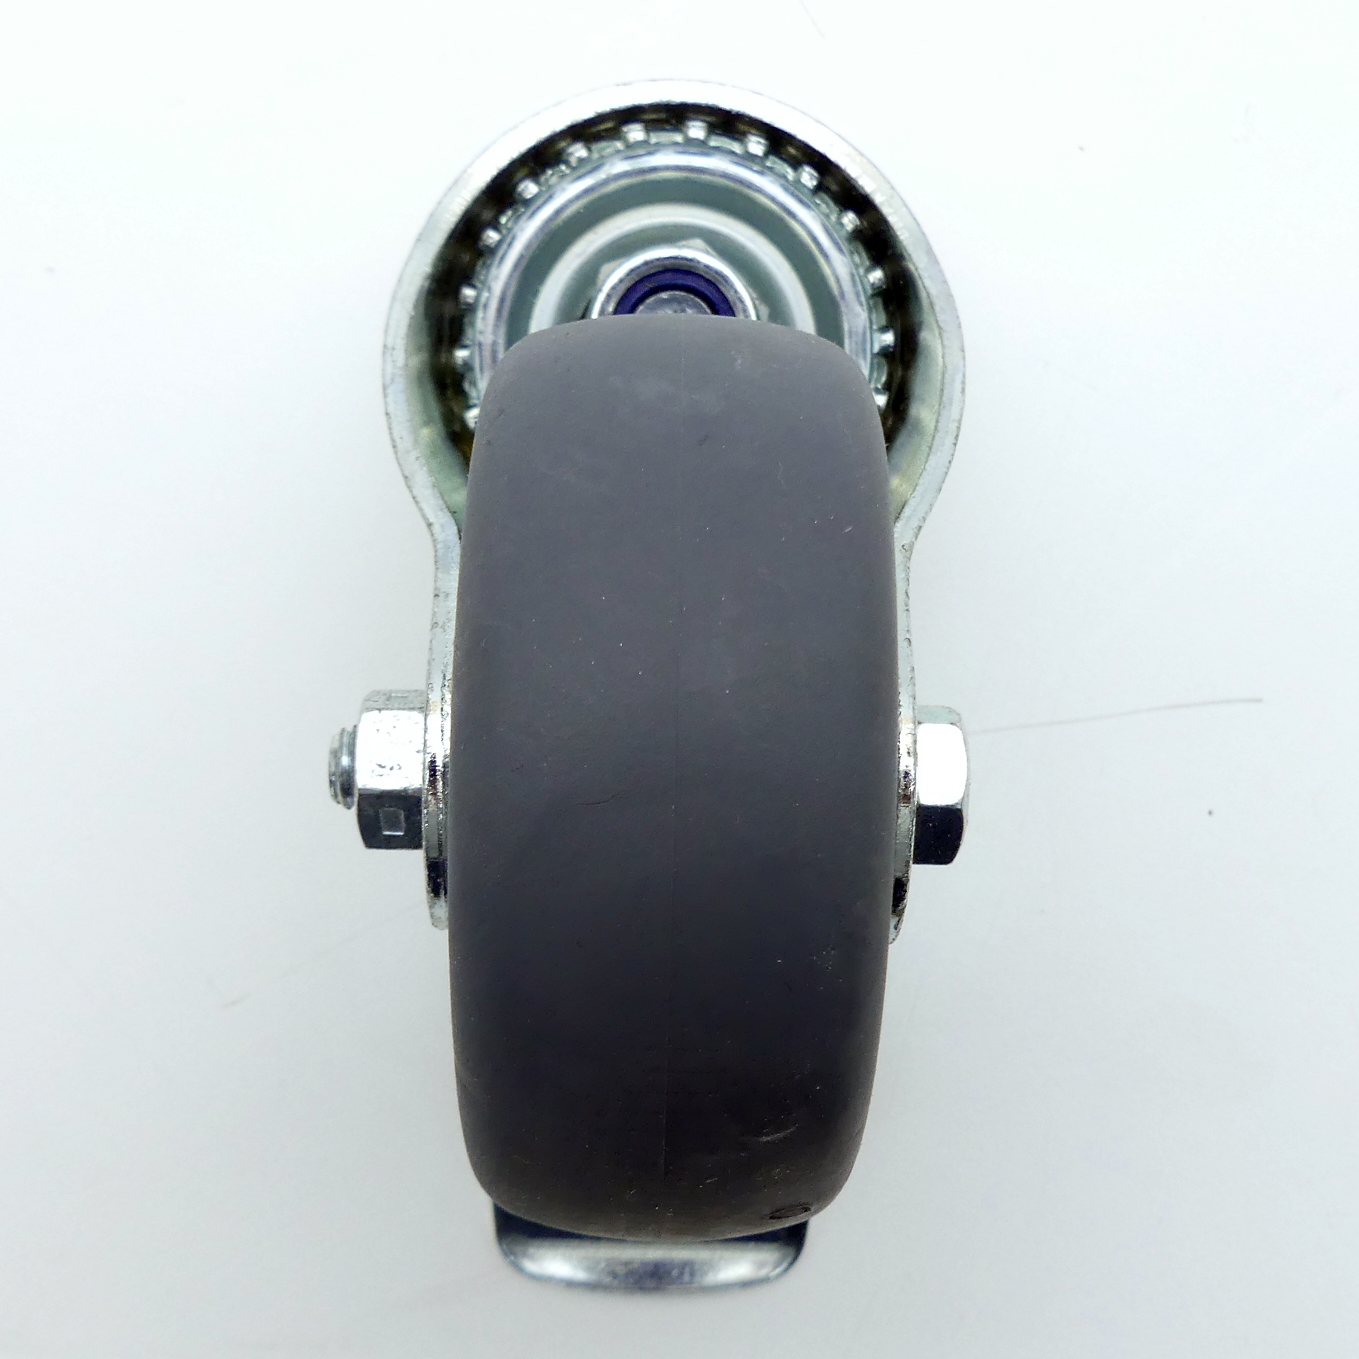 Wheels with brakes in a pack of 4 